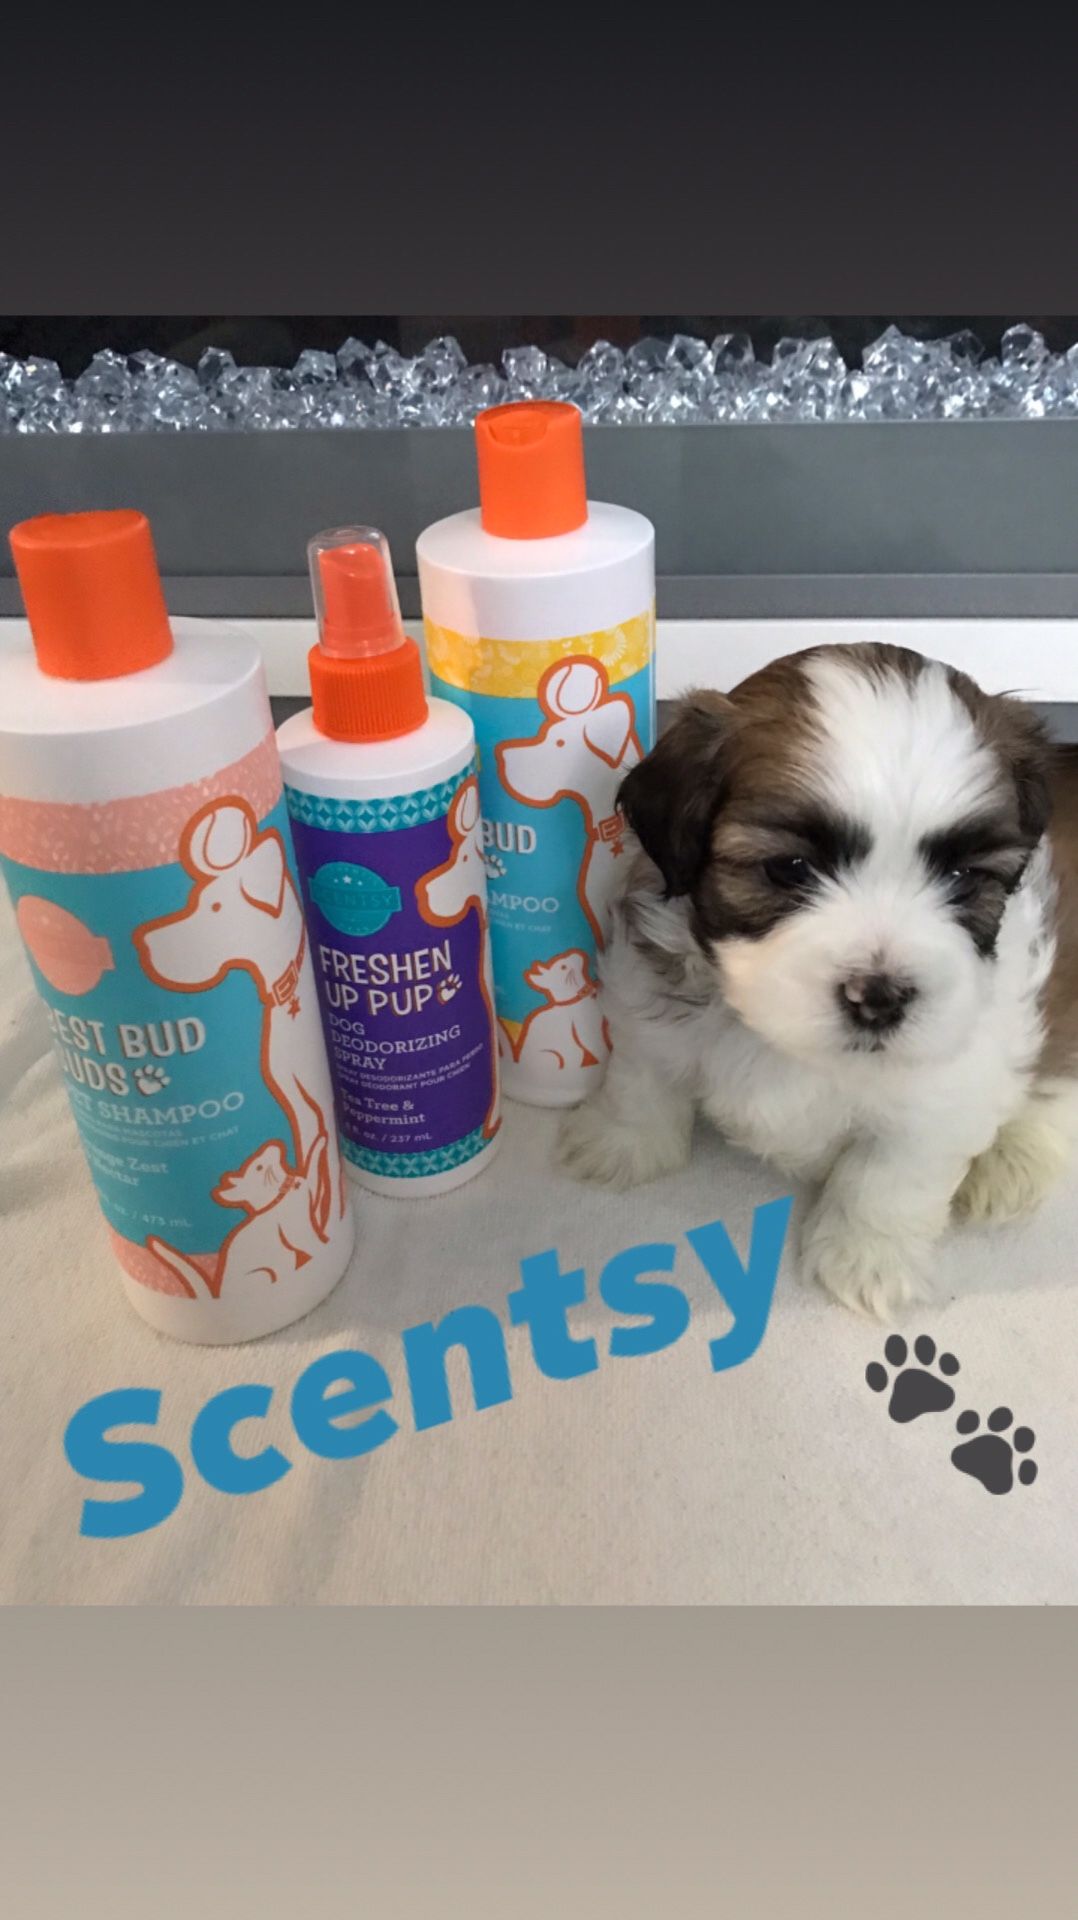 Scentsy pets products